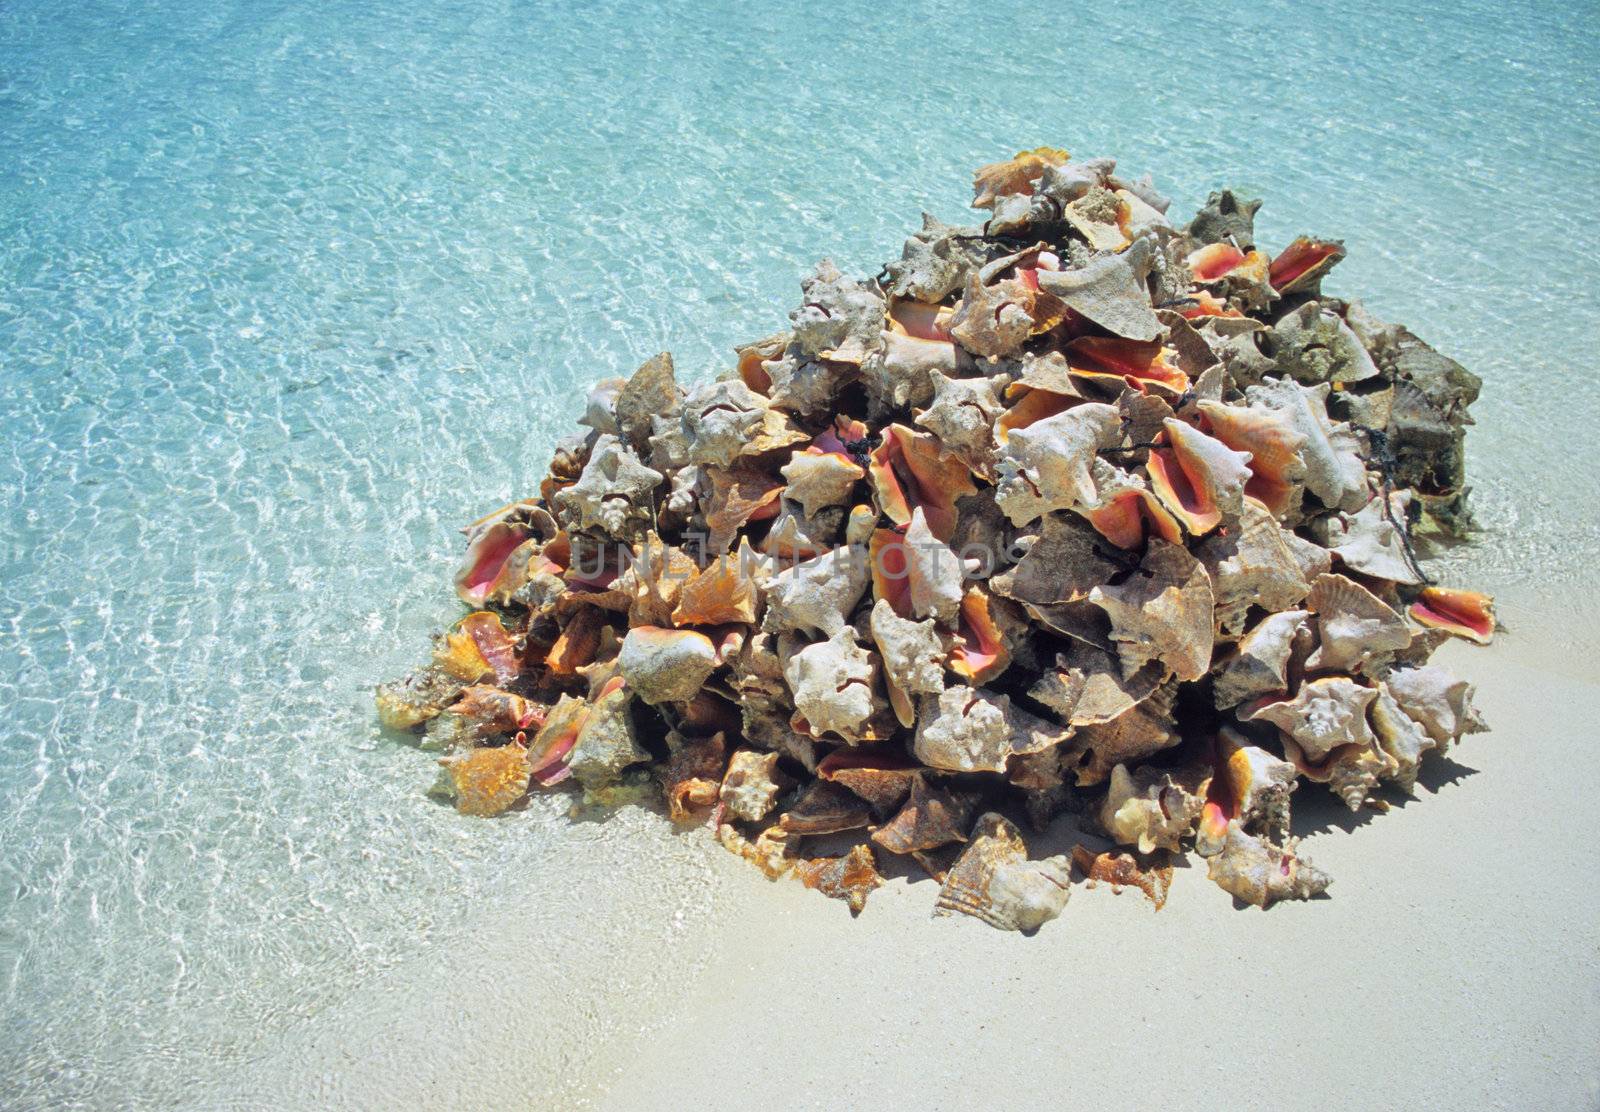 A pile of conch shell sit on the white sand beach of Great Exuma Island, the Bahamas. The locals eat the conch in salads.